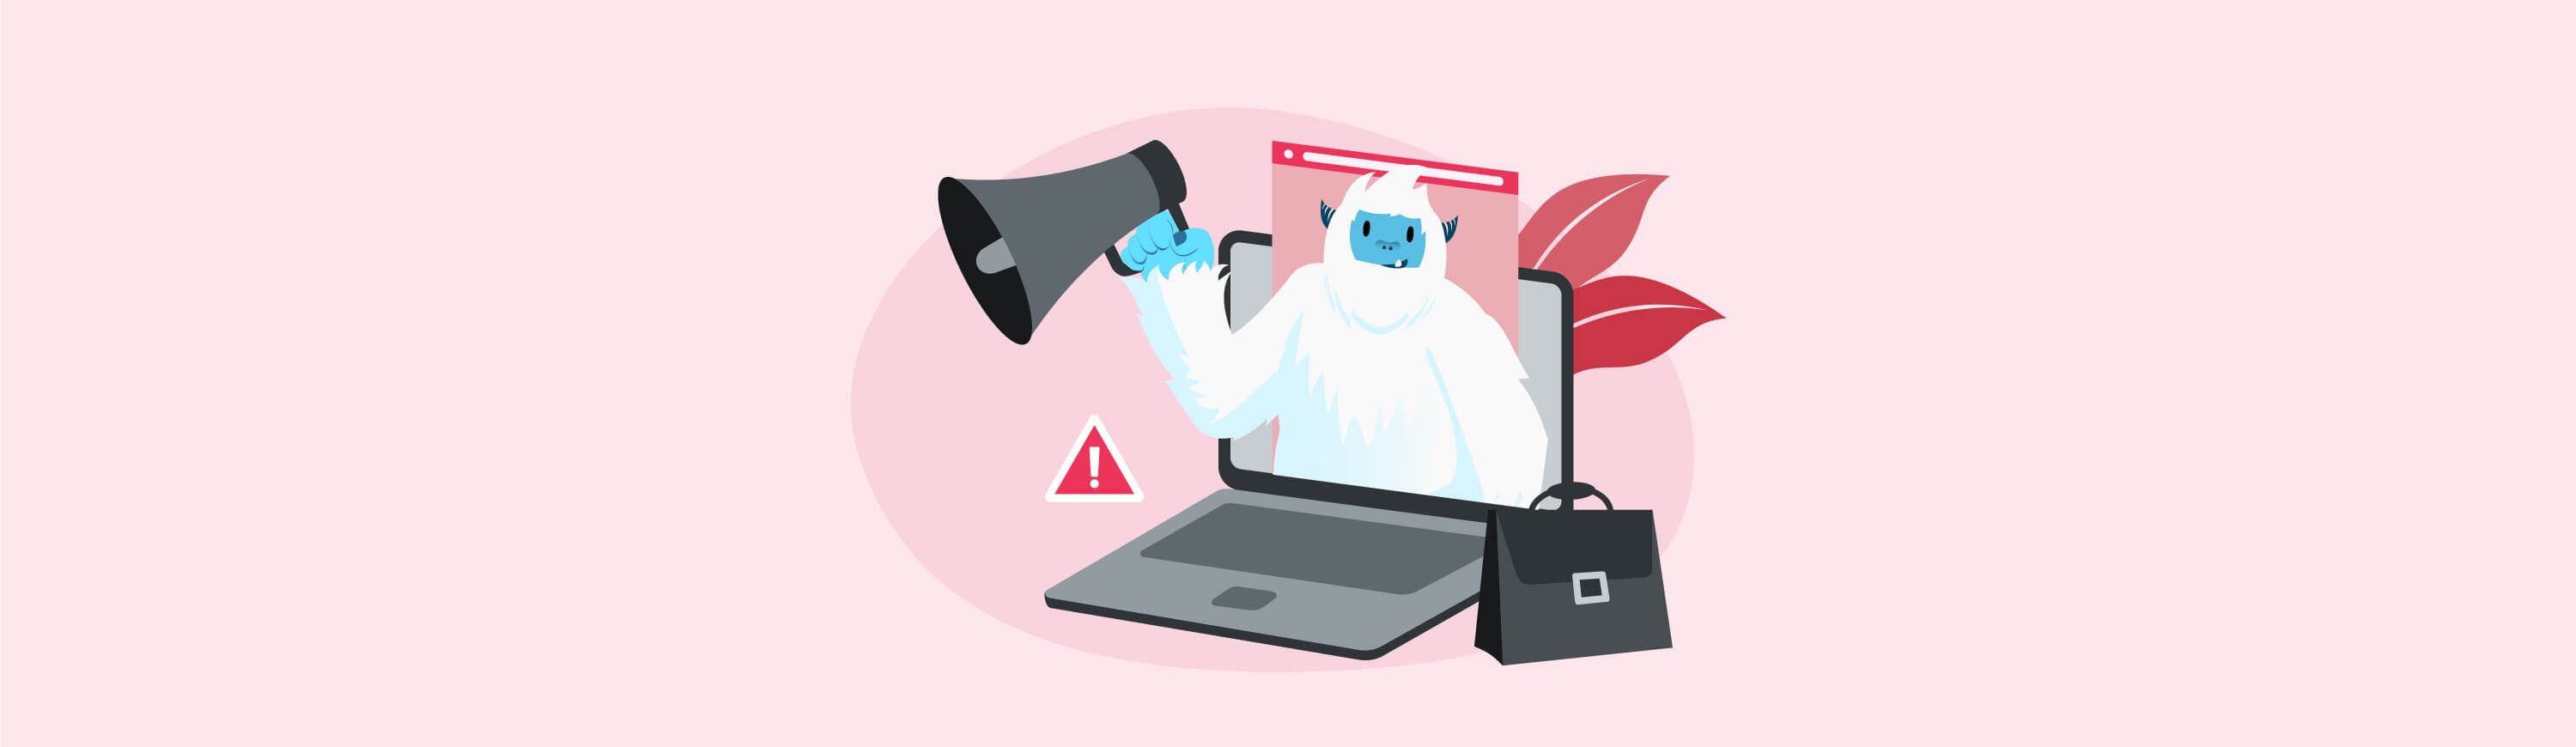 Illustration of Carl the yeti displayed on the screen of a laptop with a megaphone.